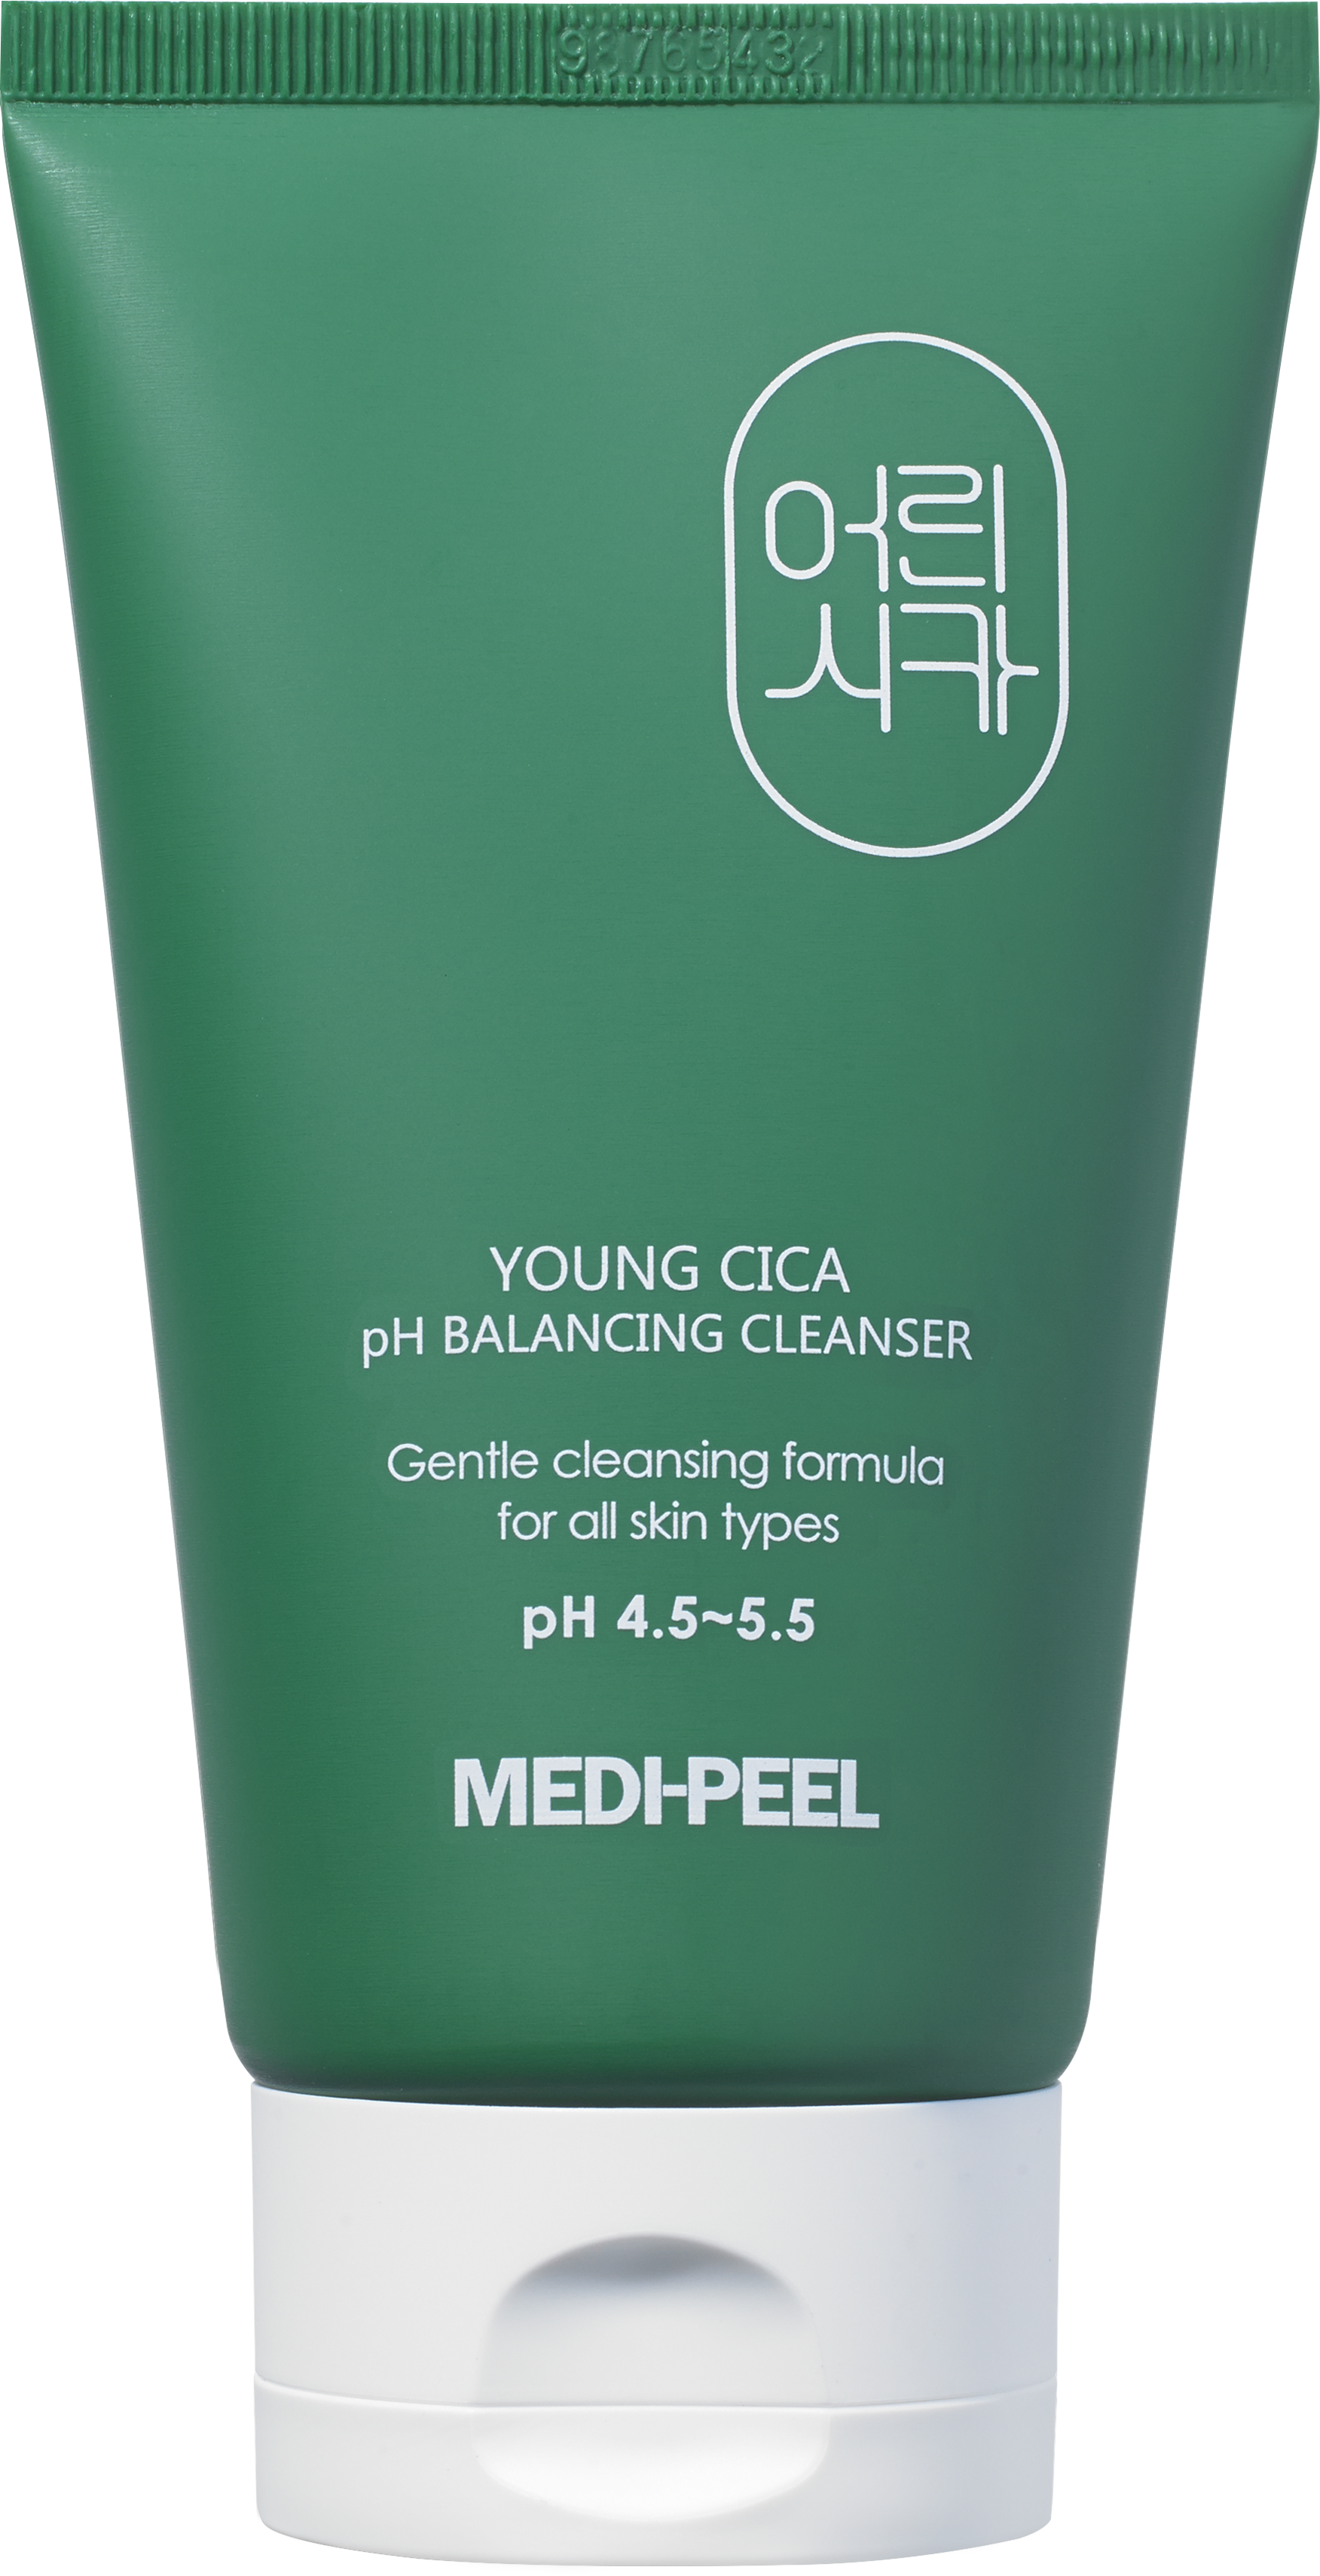 MEDI_PEEL YOUNG CICA pH BALANCING CLEANSER